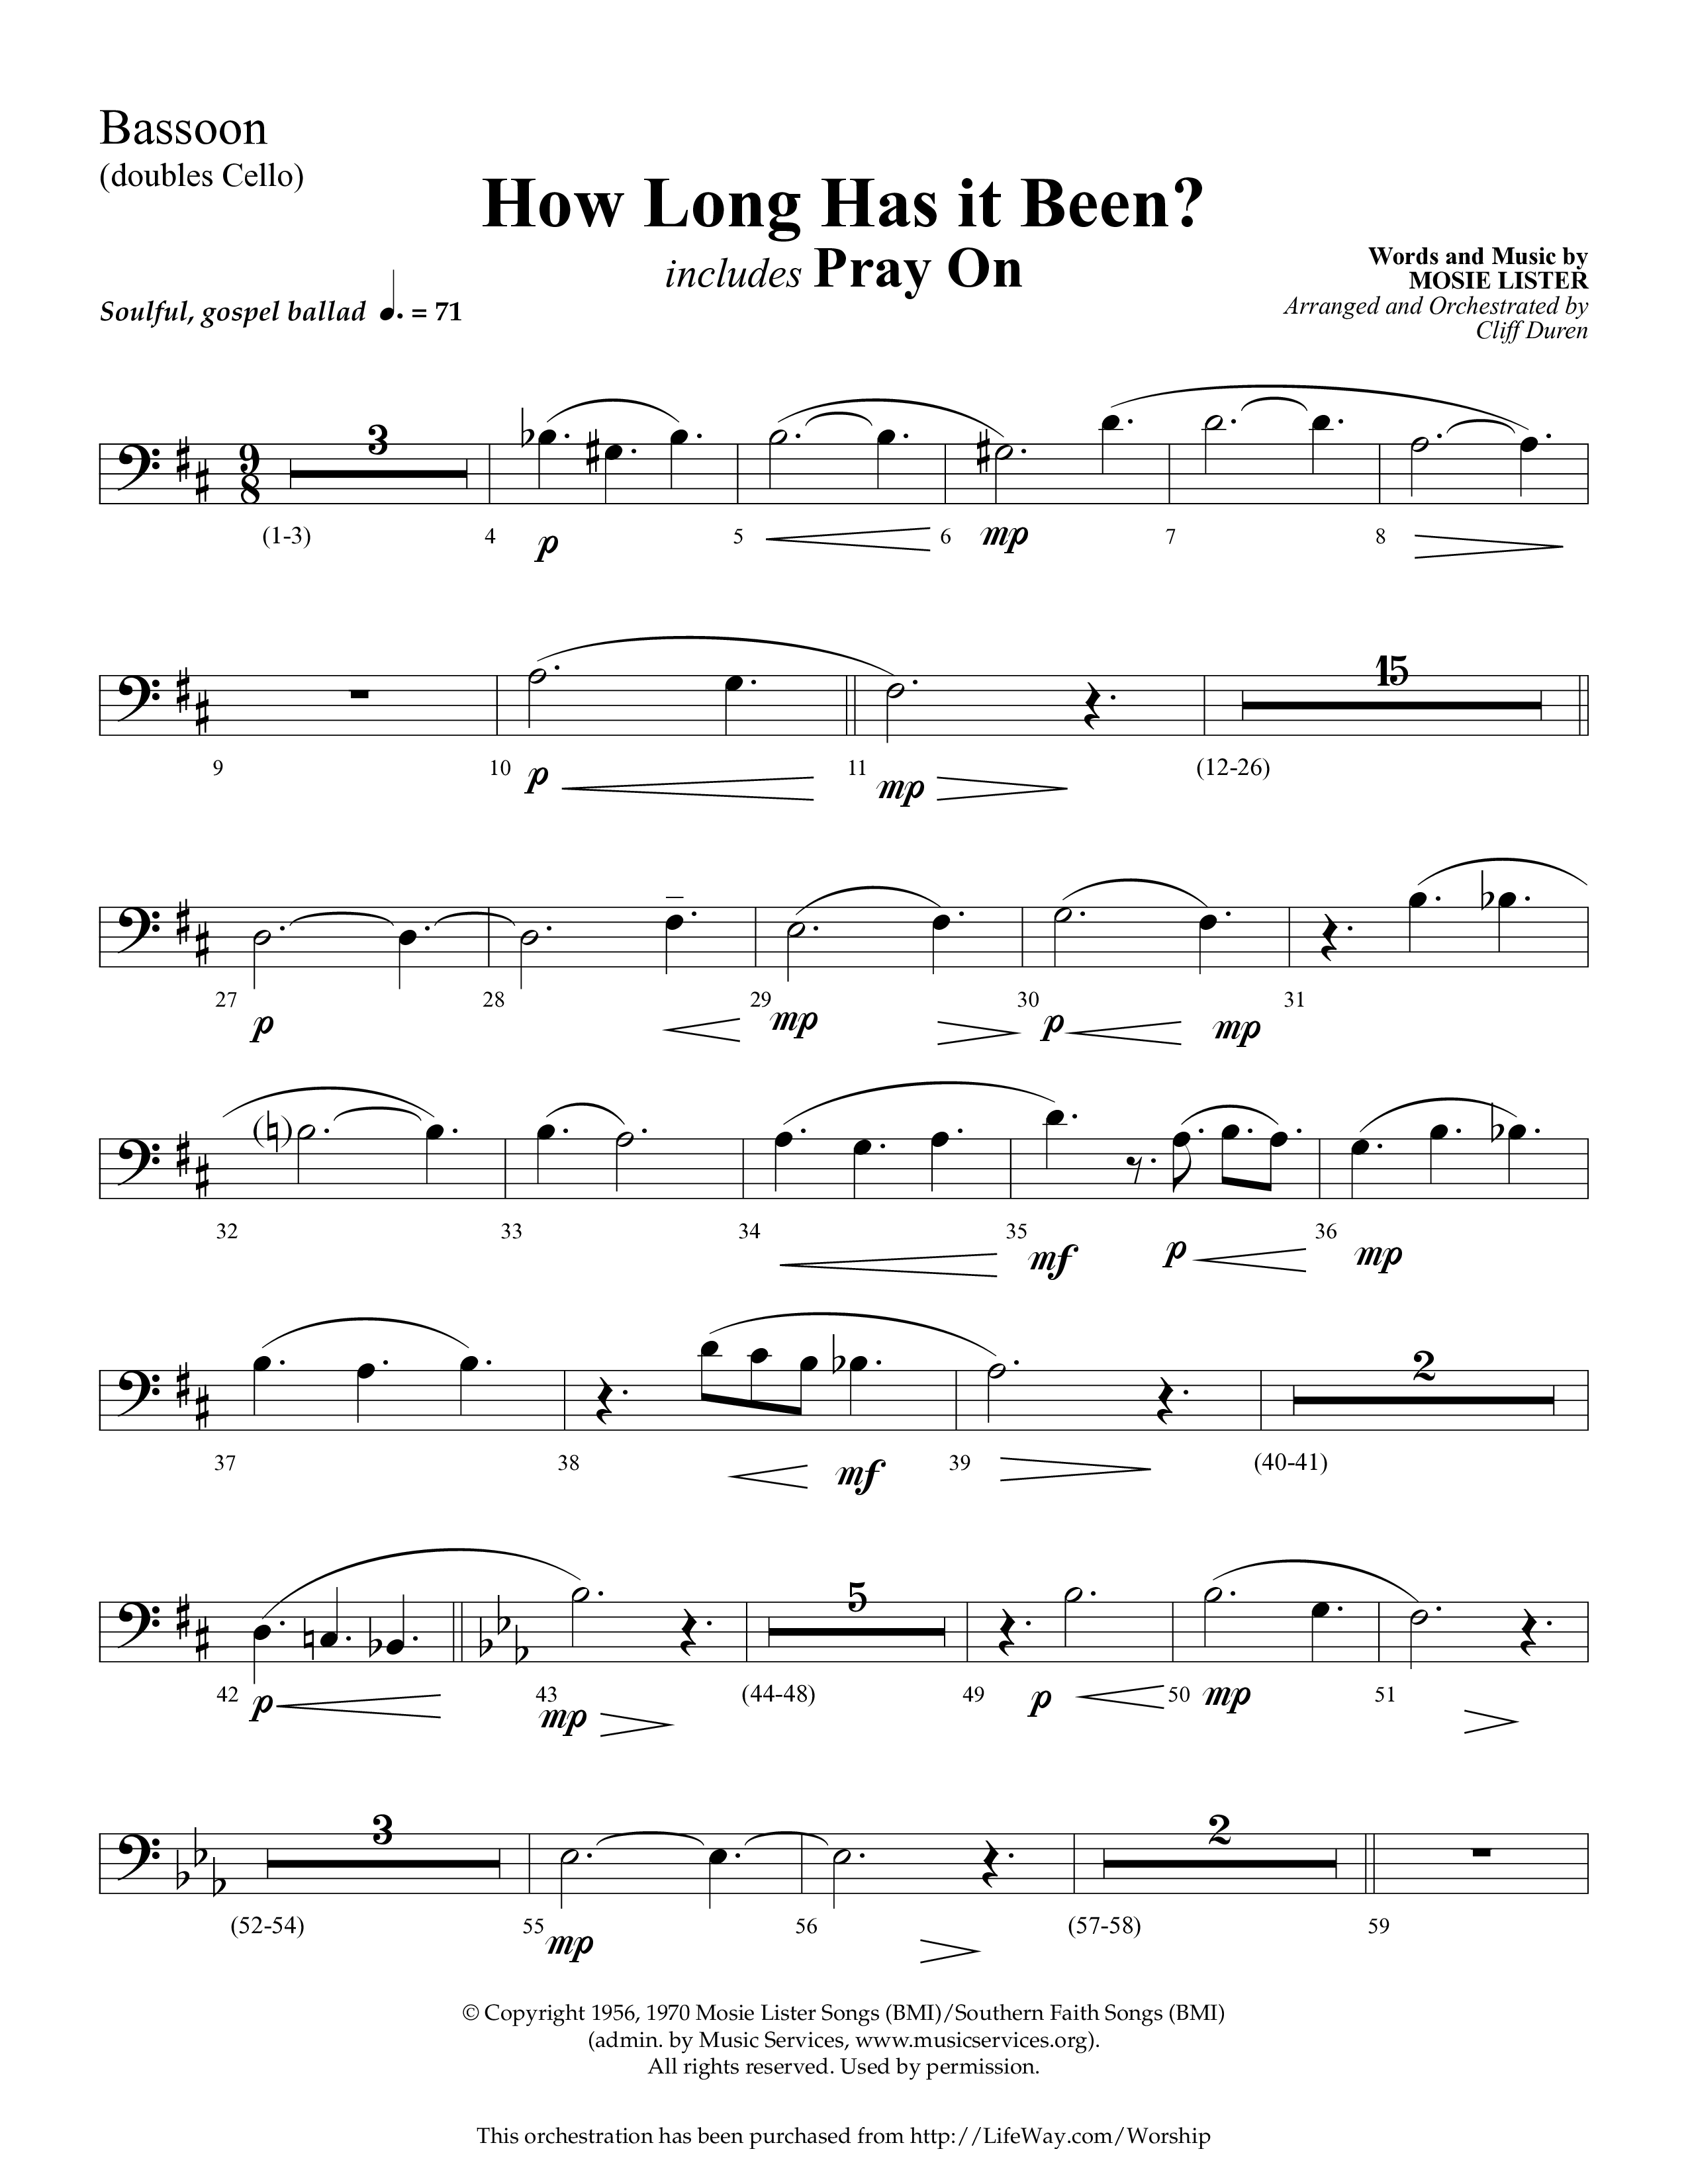 How Long Has It Been (with Pray On) (Choral Anthem SATB) Bassoon (Lifeway Choral / Arr. Cliff Duren)